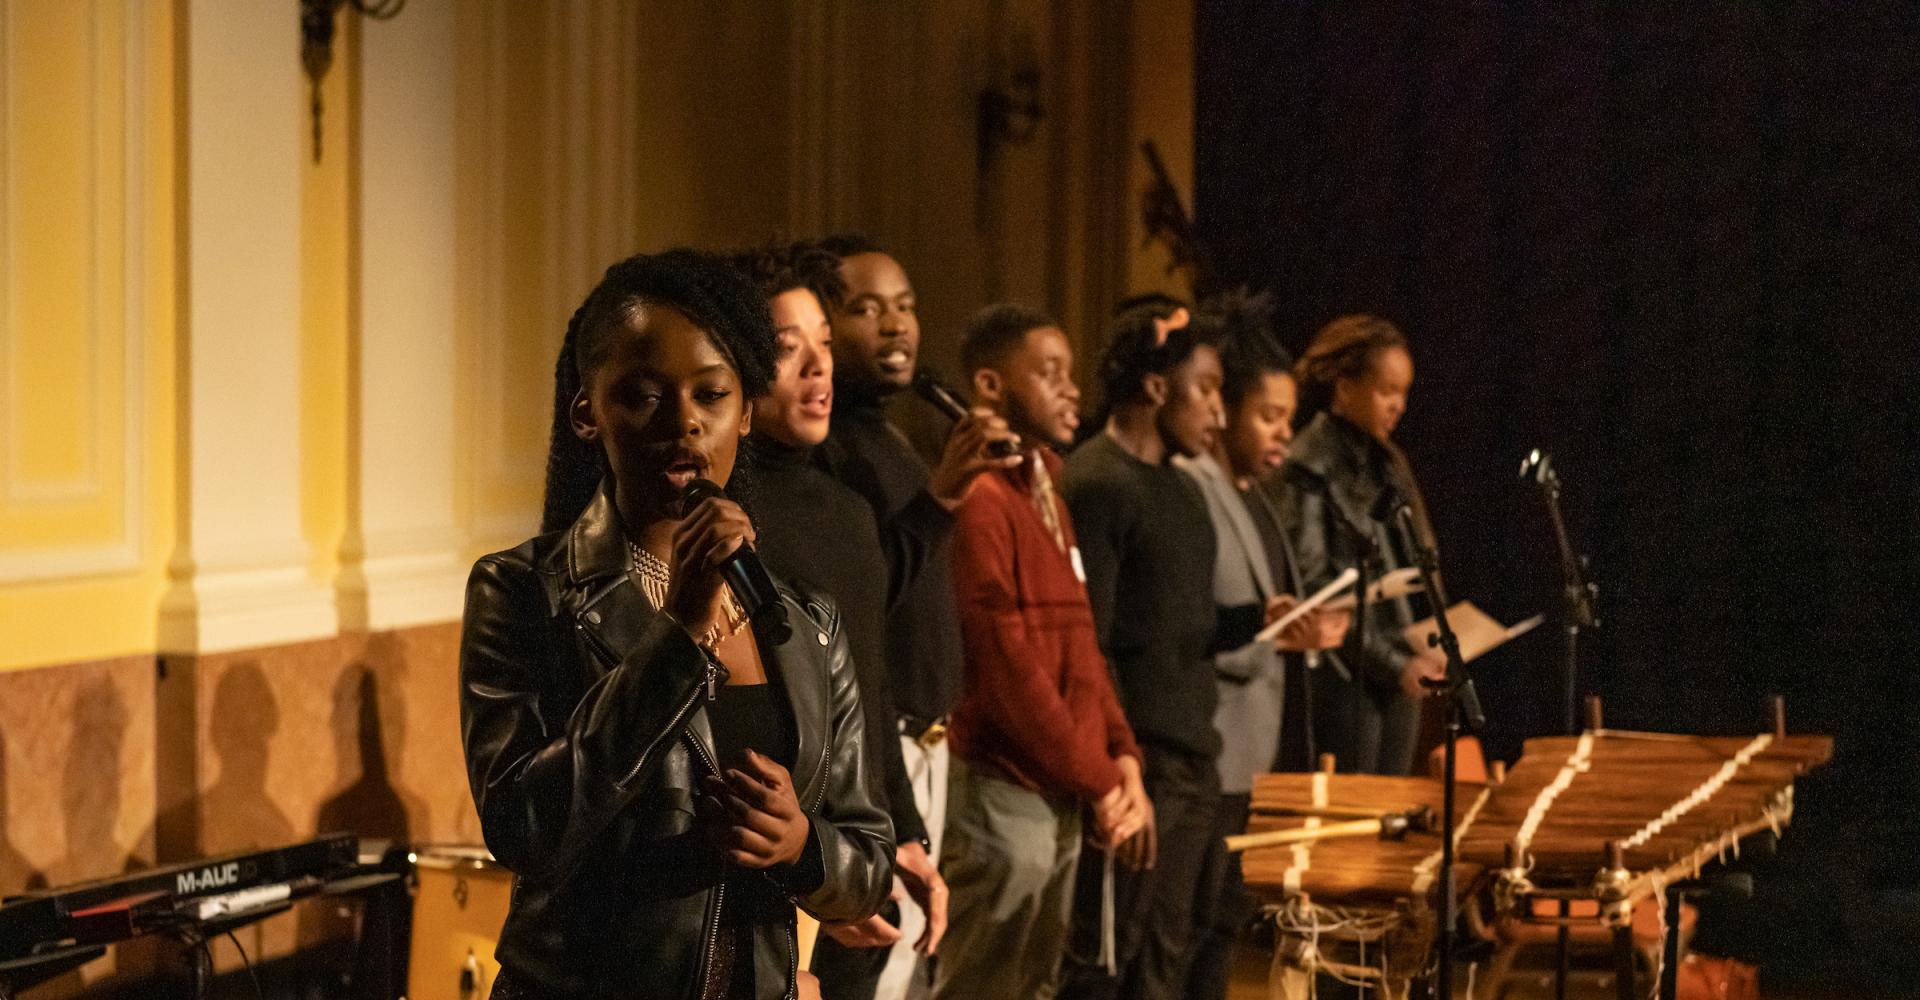 Members of the Black Student Union sing the Black National Anthem "Lift Every Voice and Sing" at the 2020 annual Coretta Scott King concert